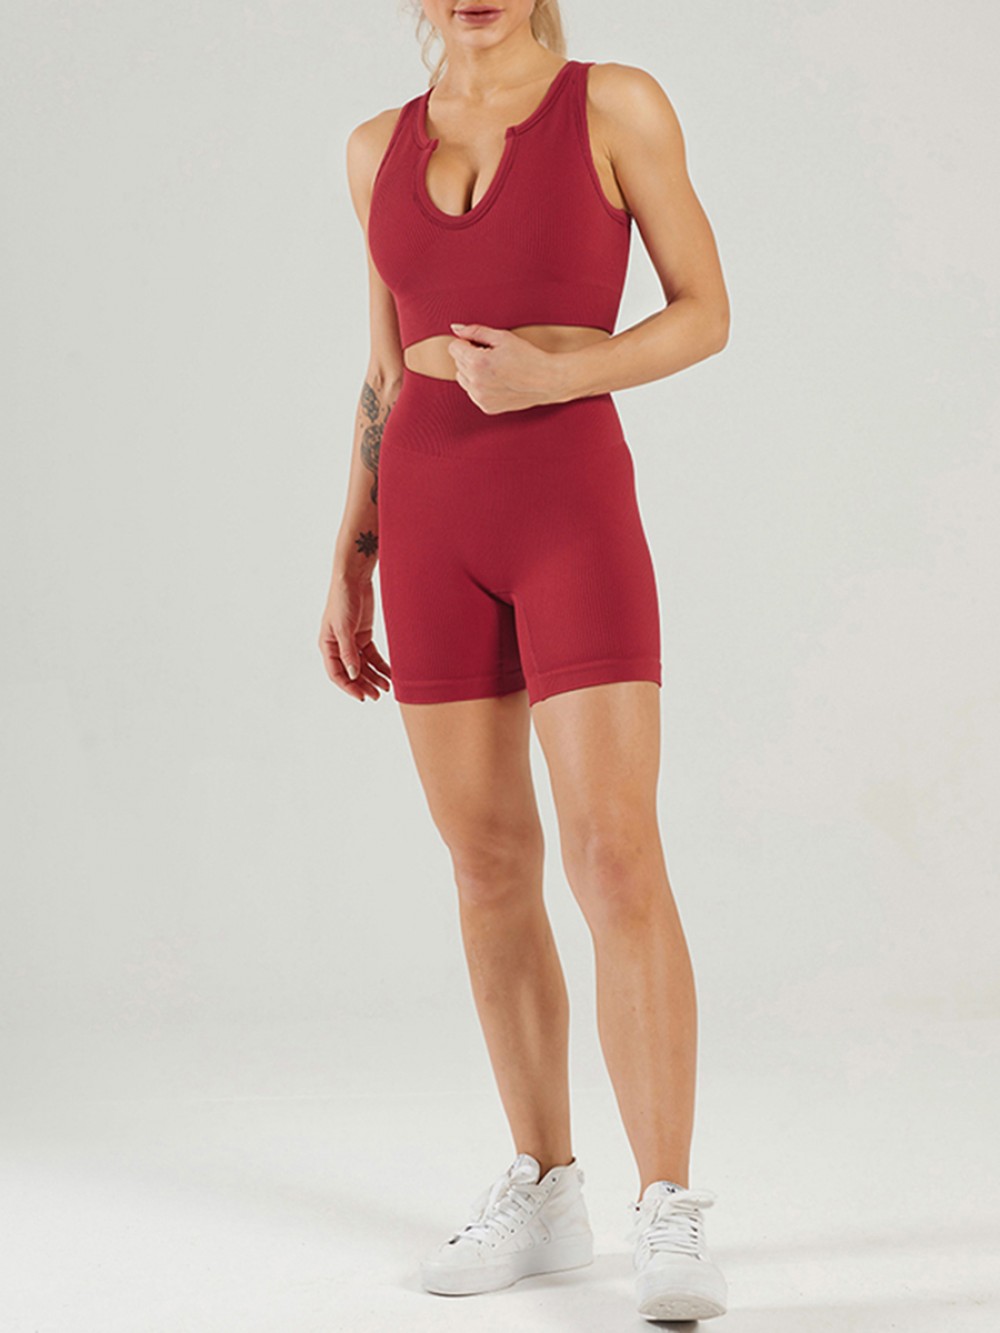 Wine Red High Waist Seamless Yoga Outfit Low-Cut Neck Breath